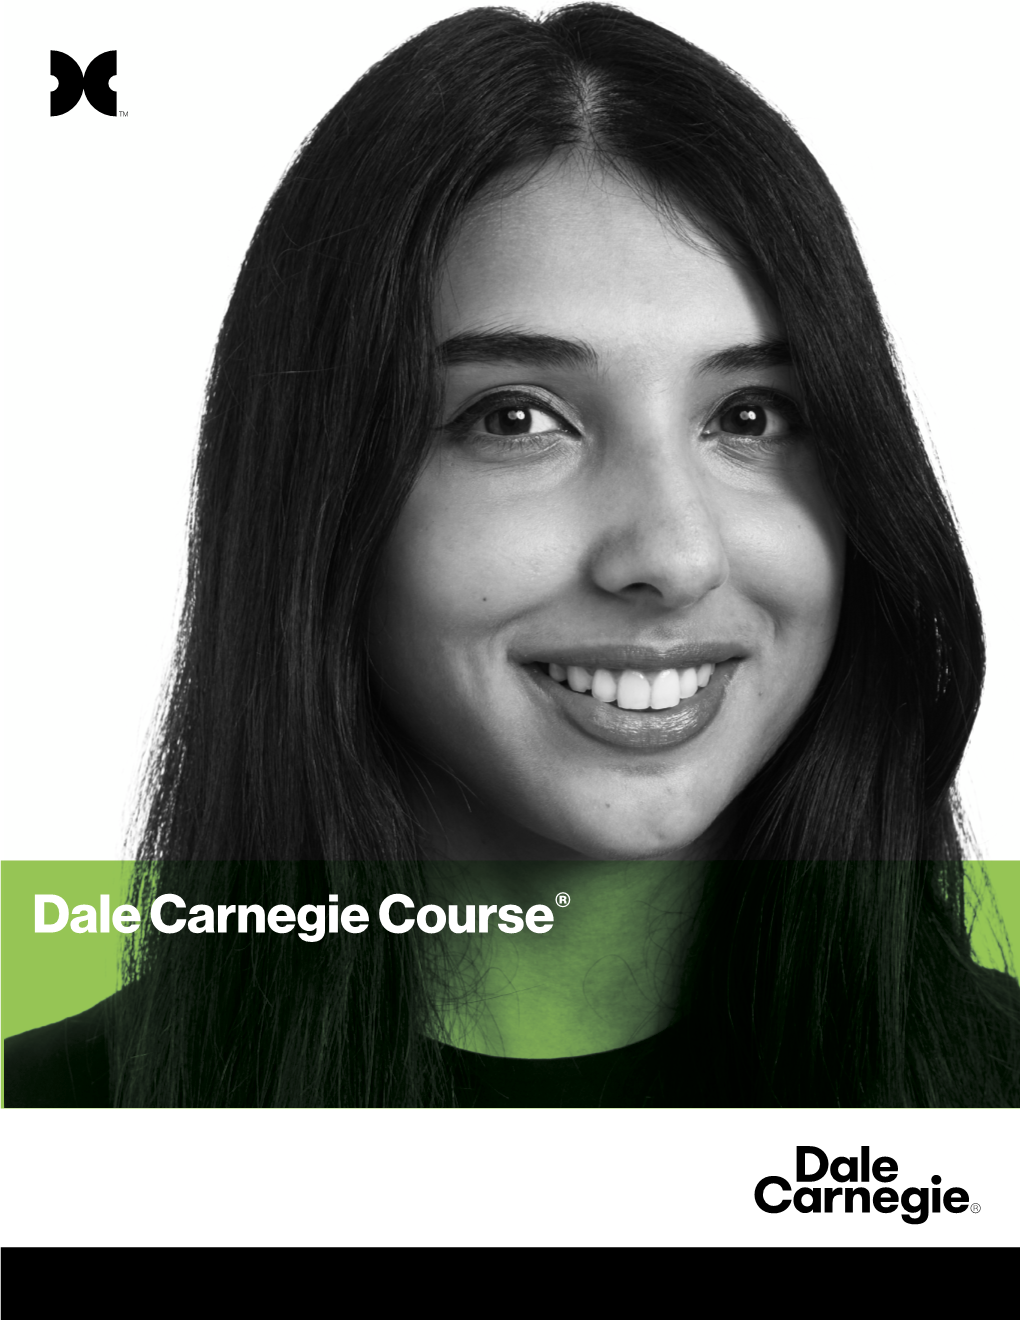 Dale Carnegie Course® Your Path to Personal and Professional Success